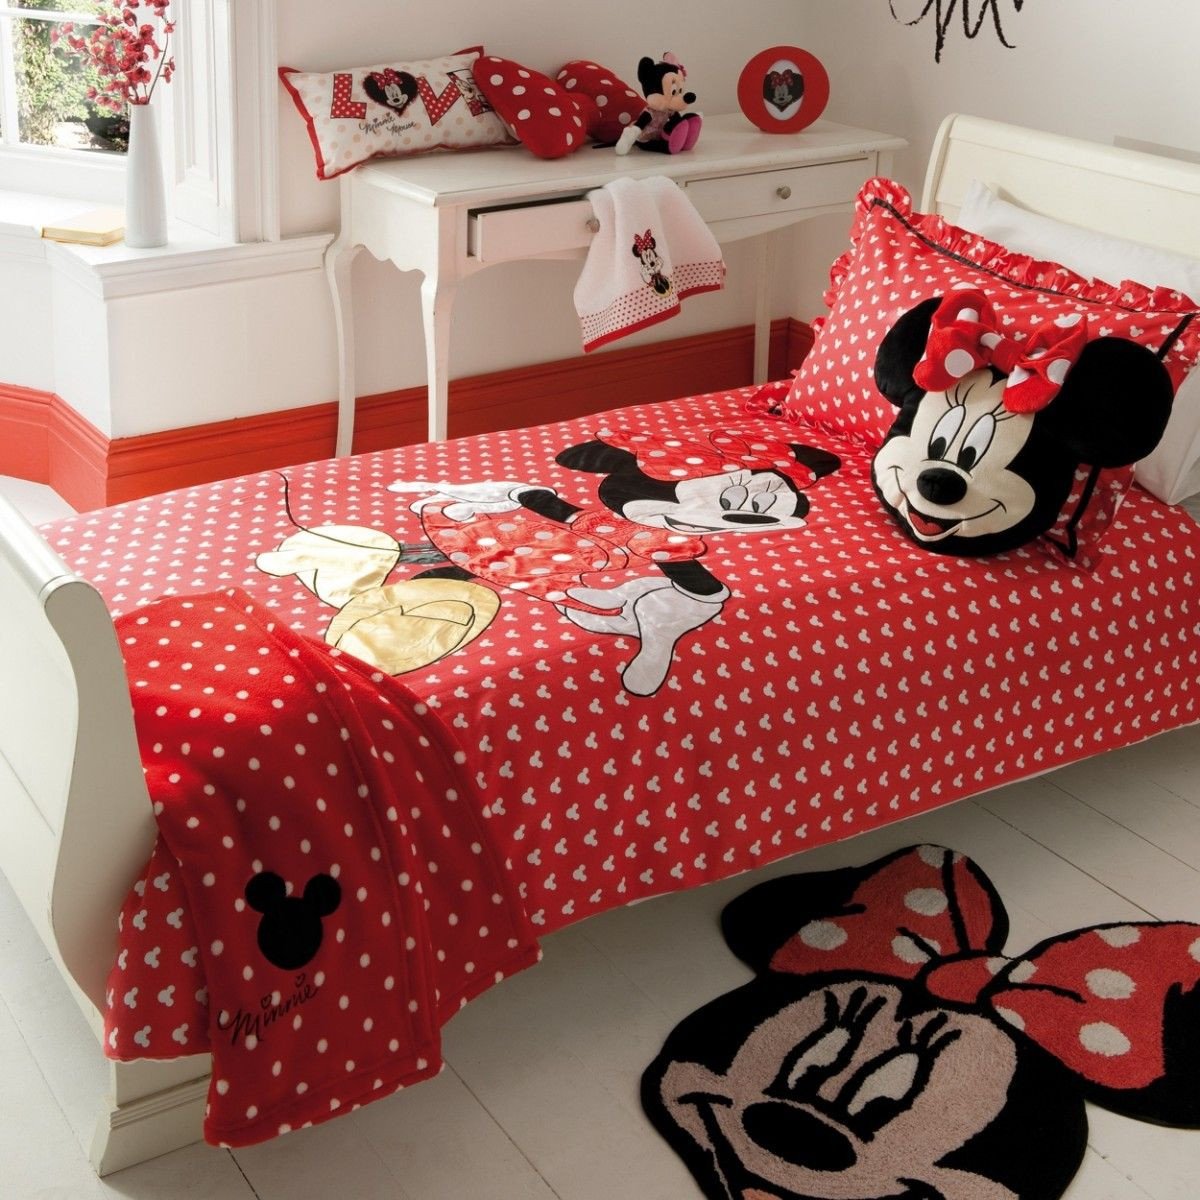 Mickey Mouse Bedroom Accessories Lovely Minnie Mouse Wall Decorating Kit